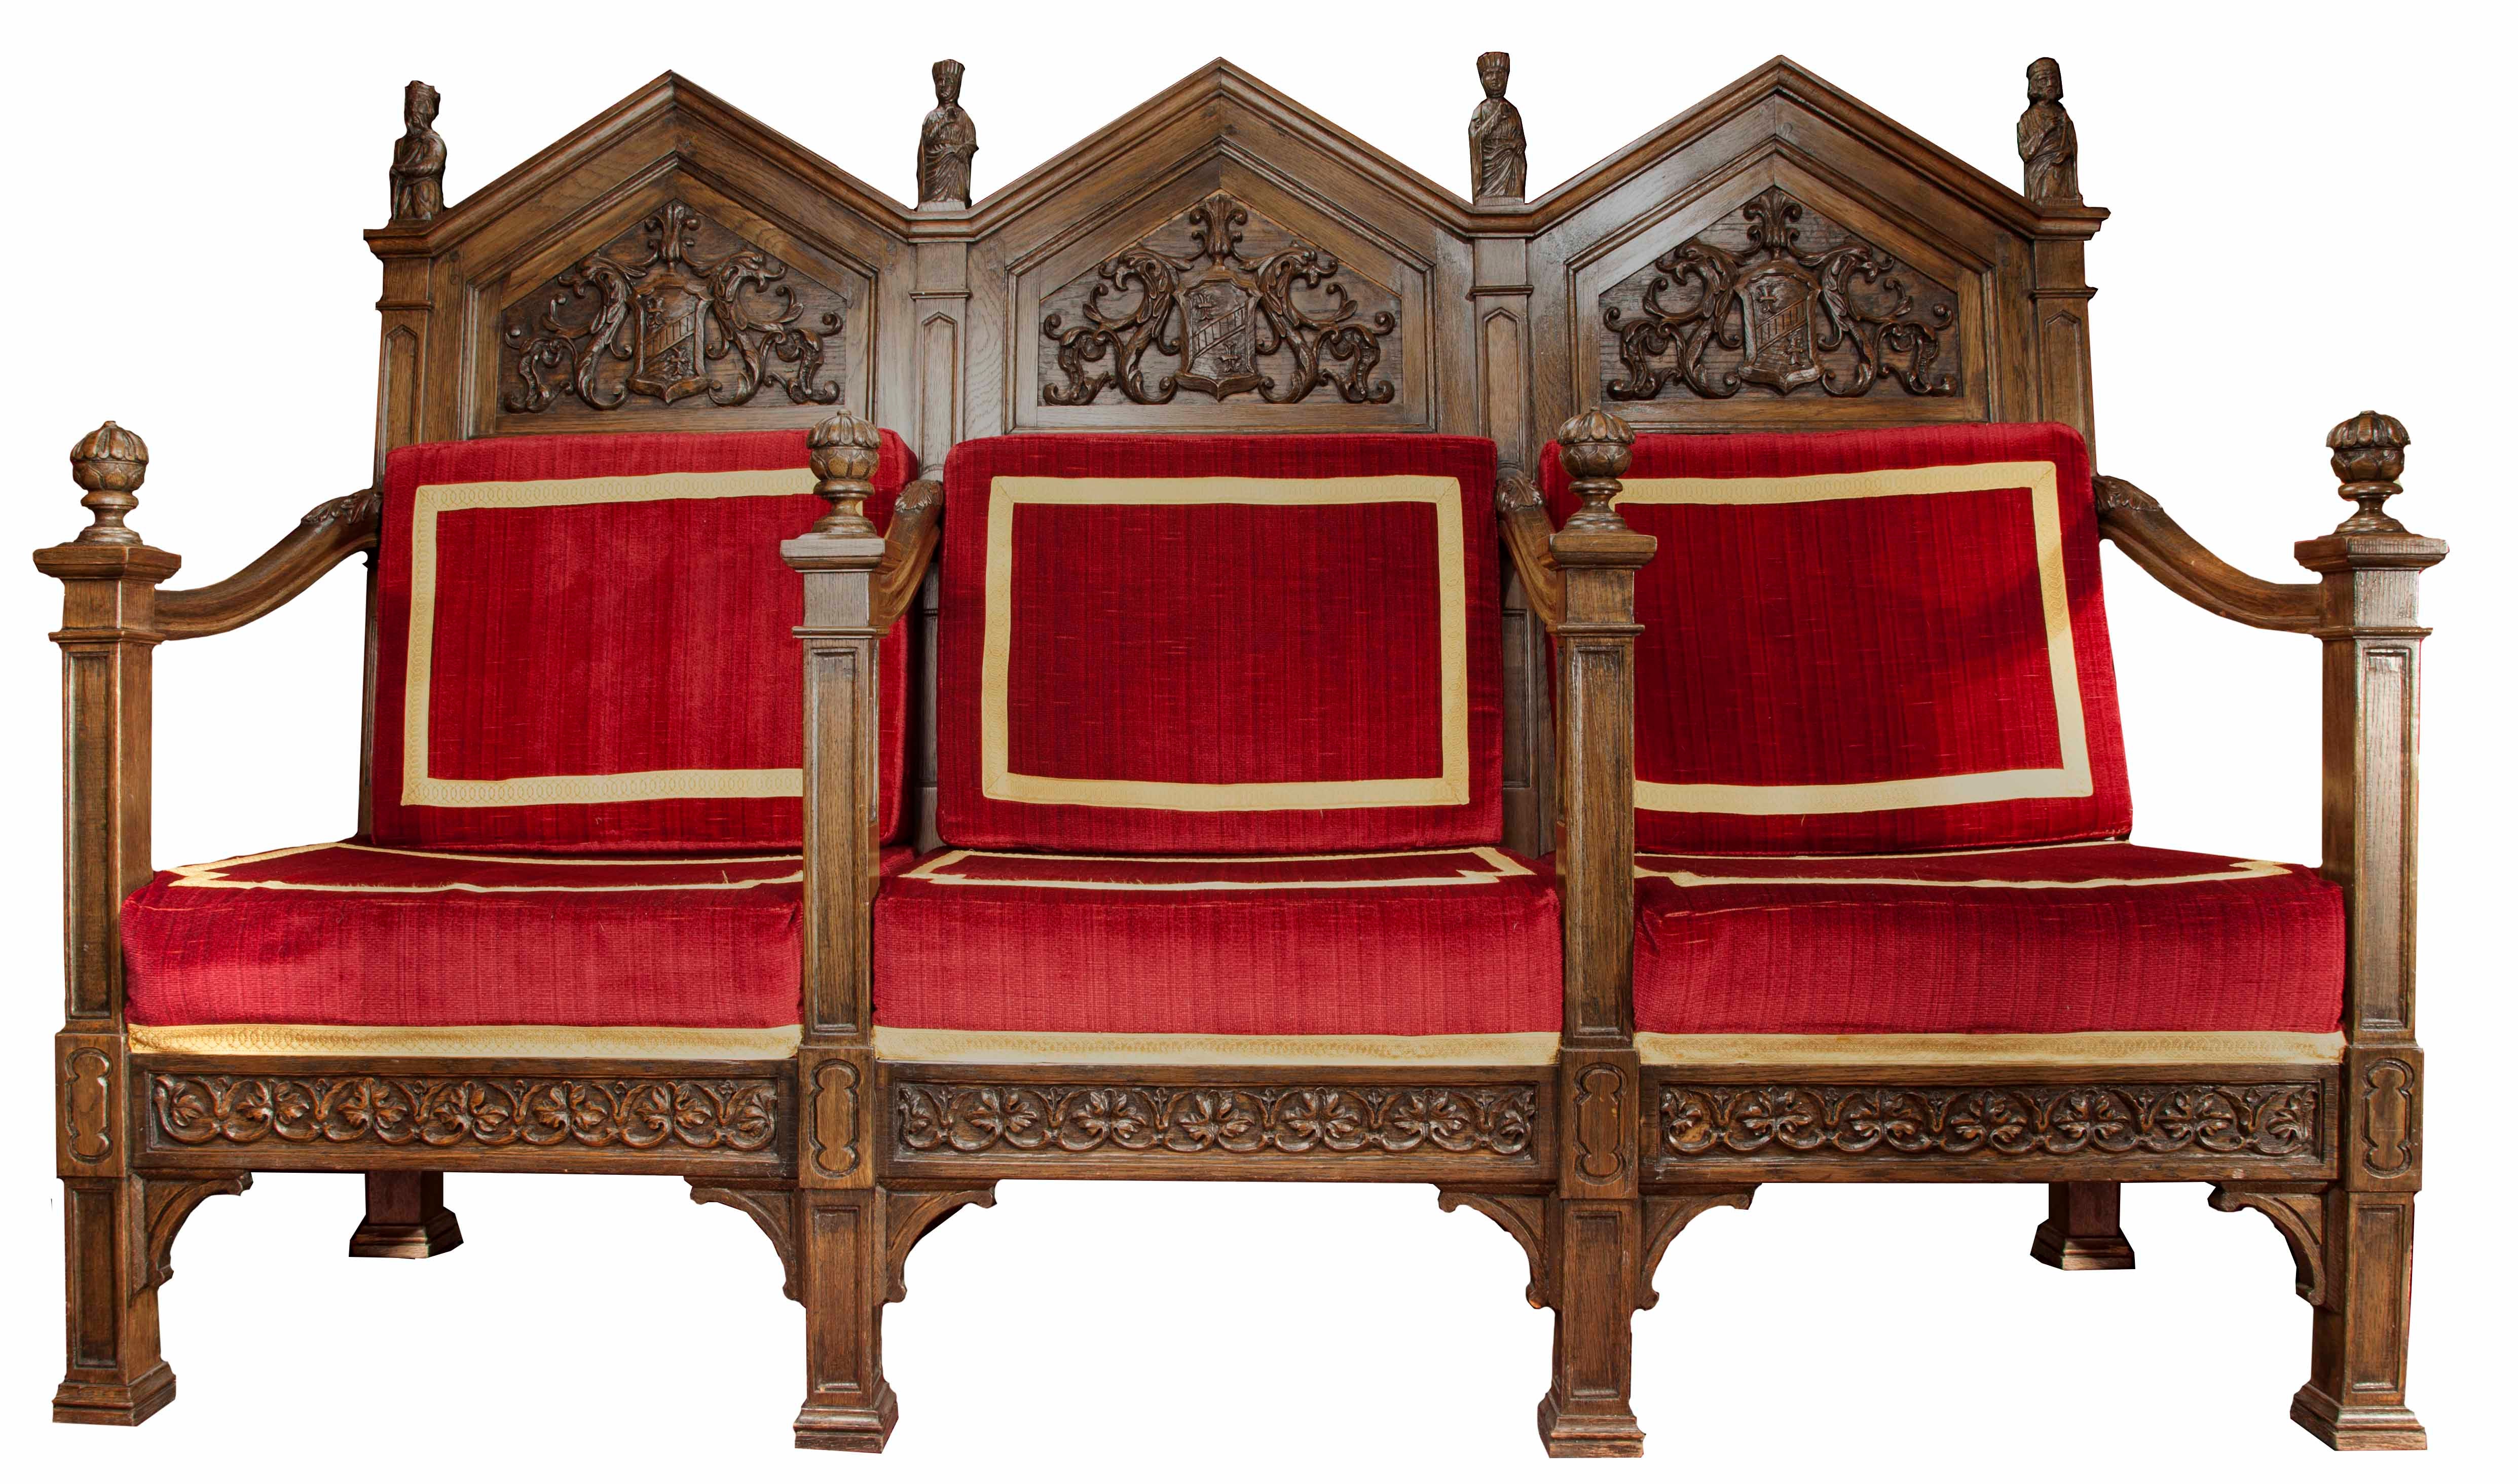 Three Seat Italian Cathedral Pew For Sale